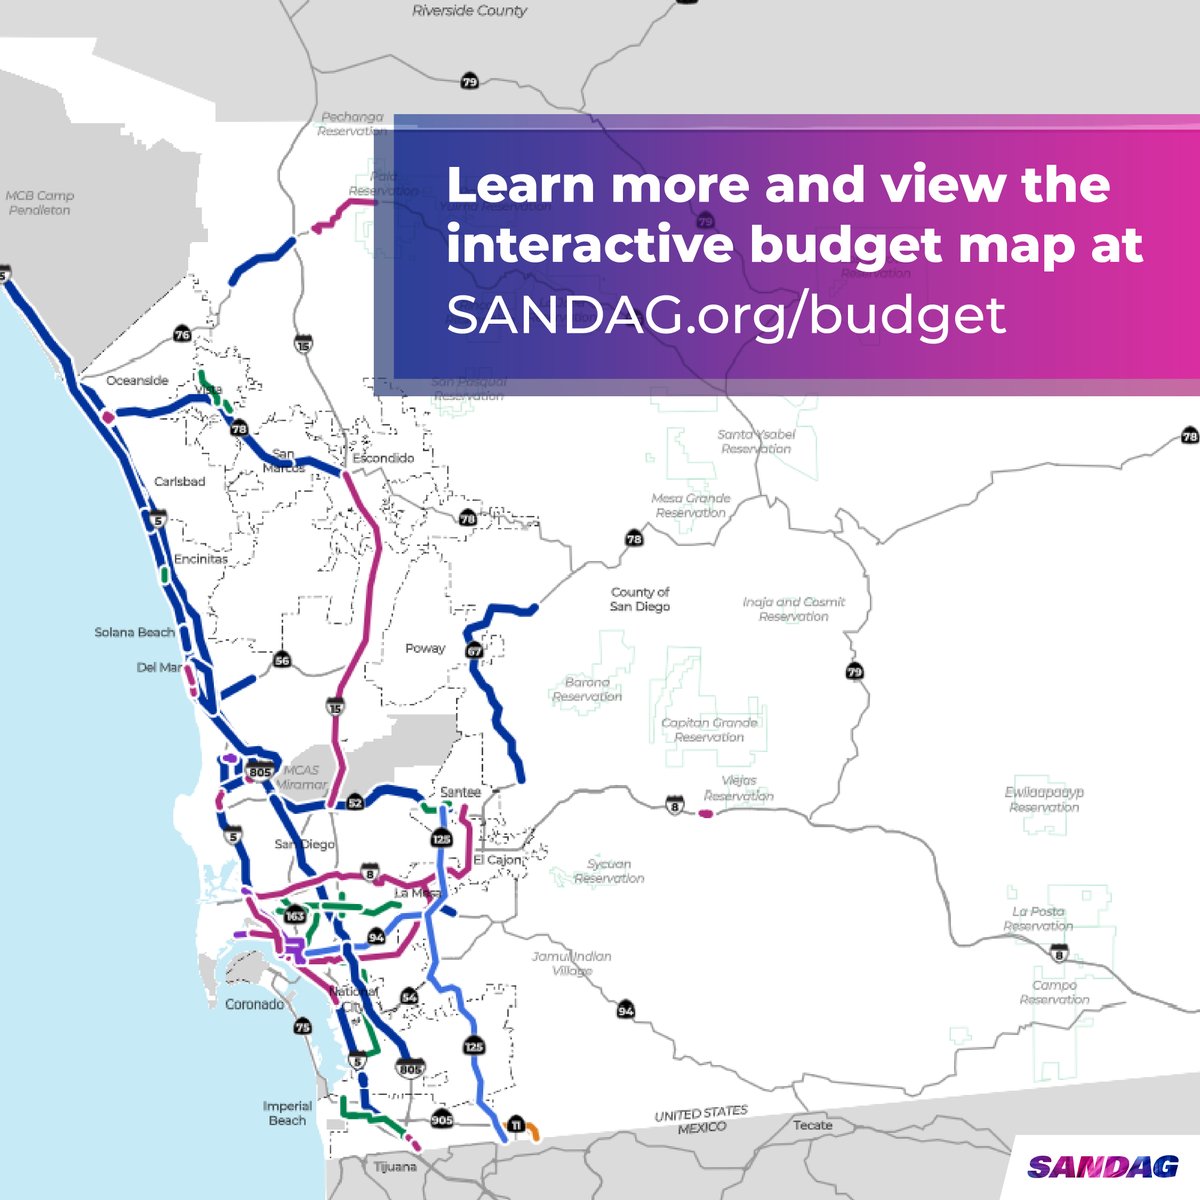 The #SANDAG Board of Directors has approved the FY 2025 budget! Learn more and view the interactive budget map at SANDAG.org/budget. #BODrecap #Budget #FY2025